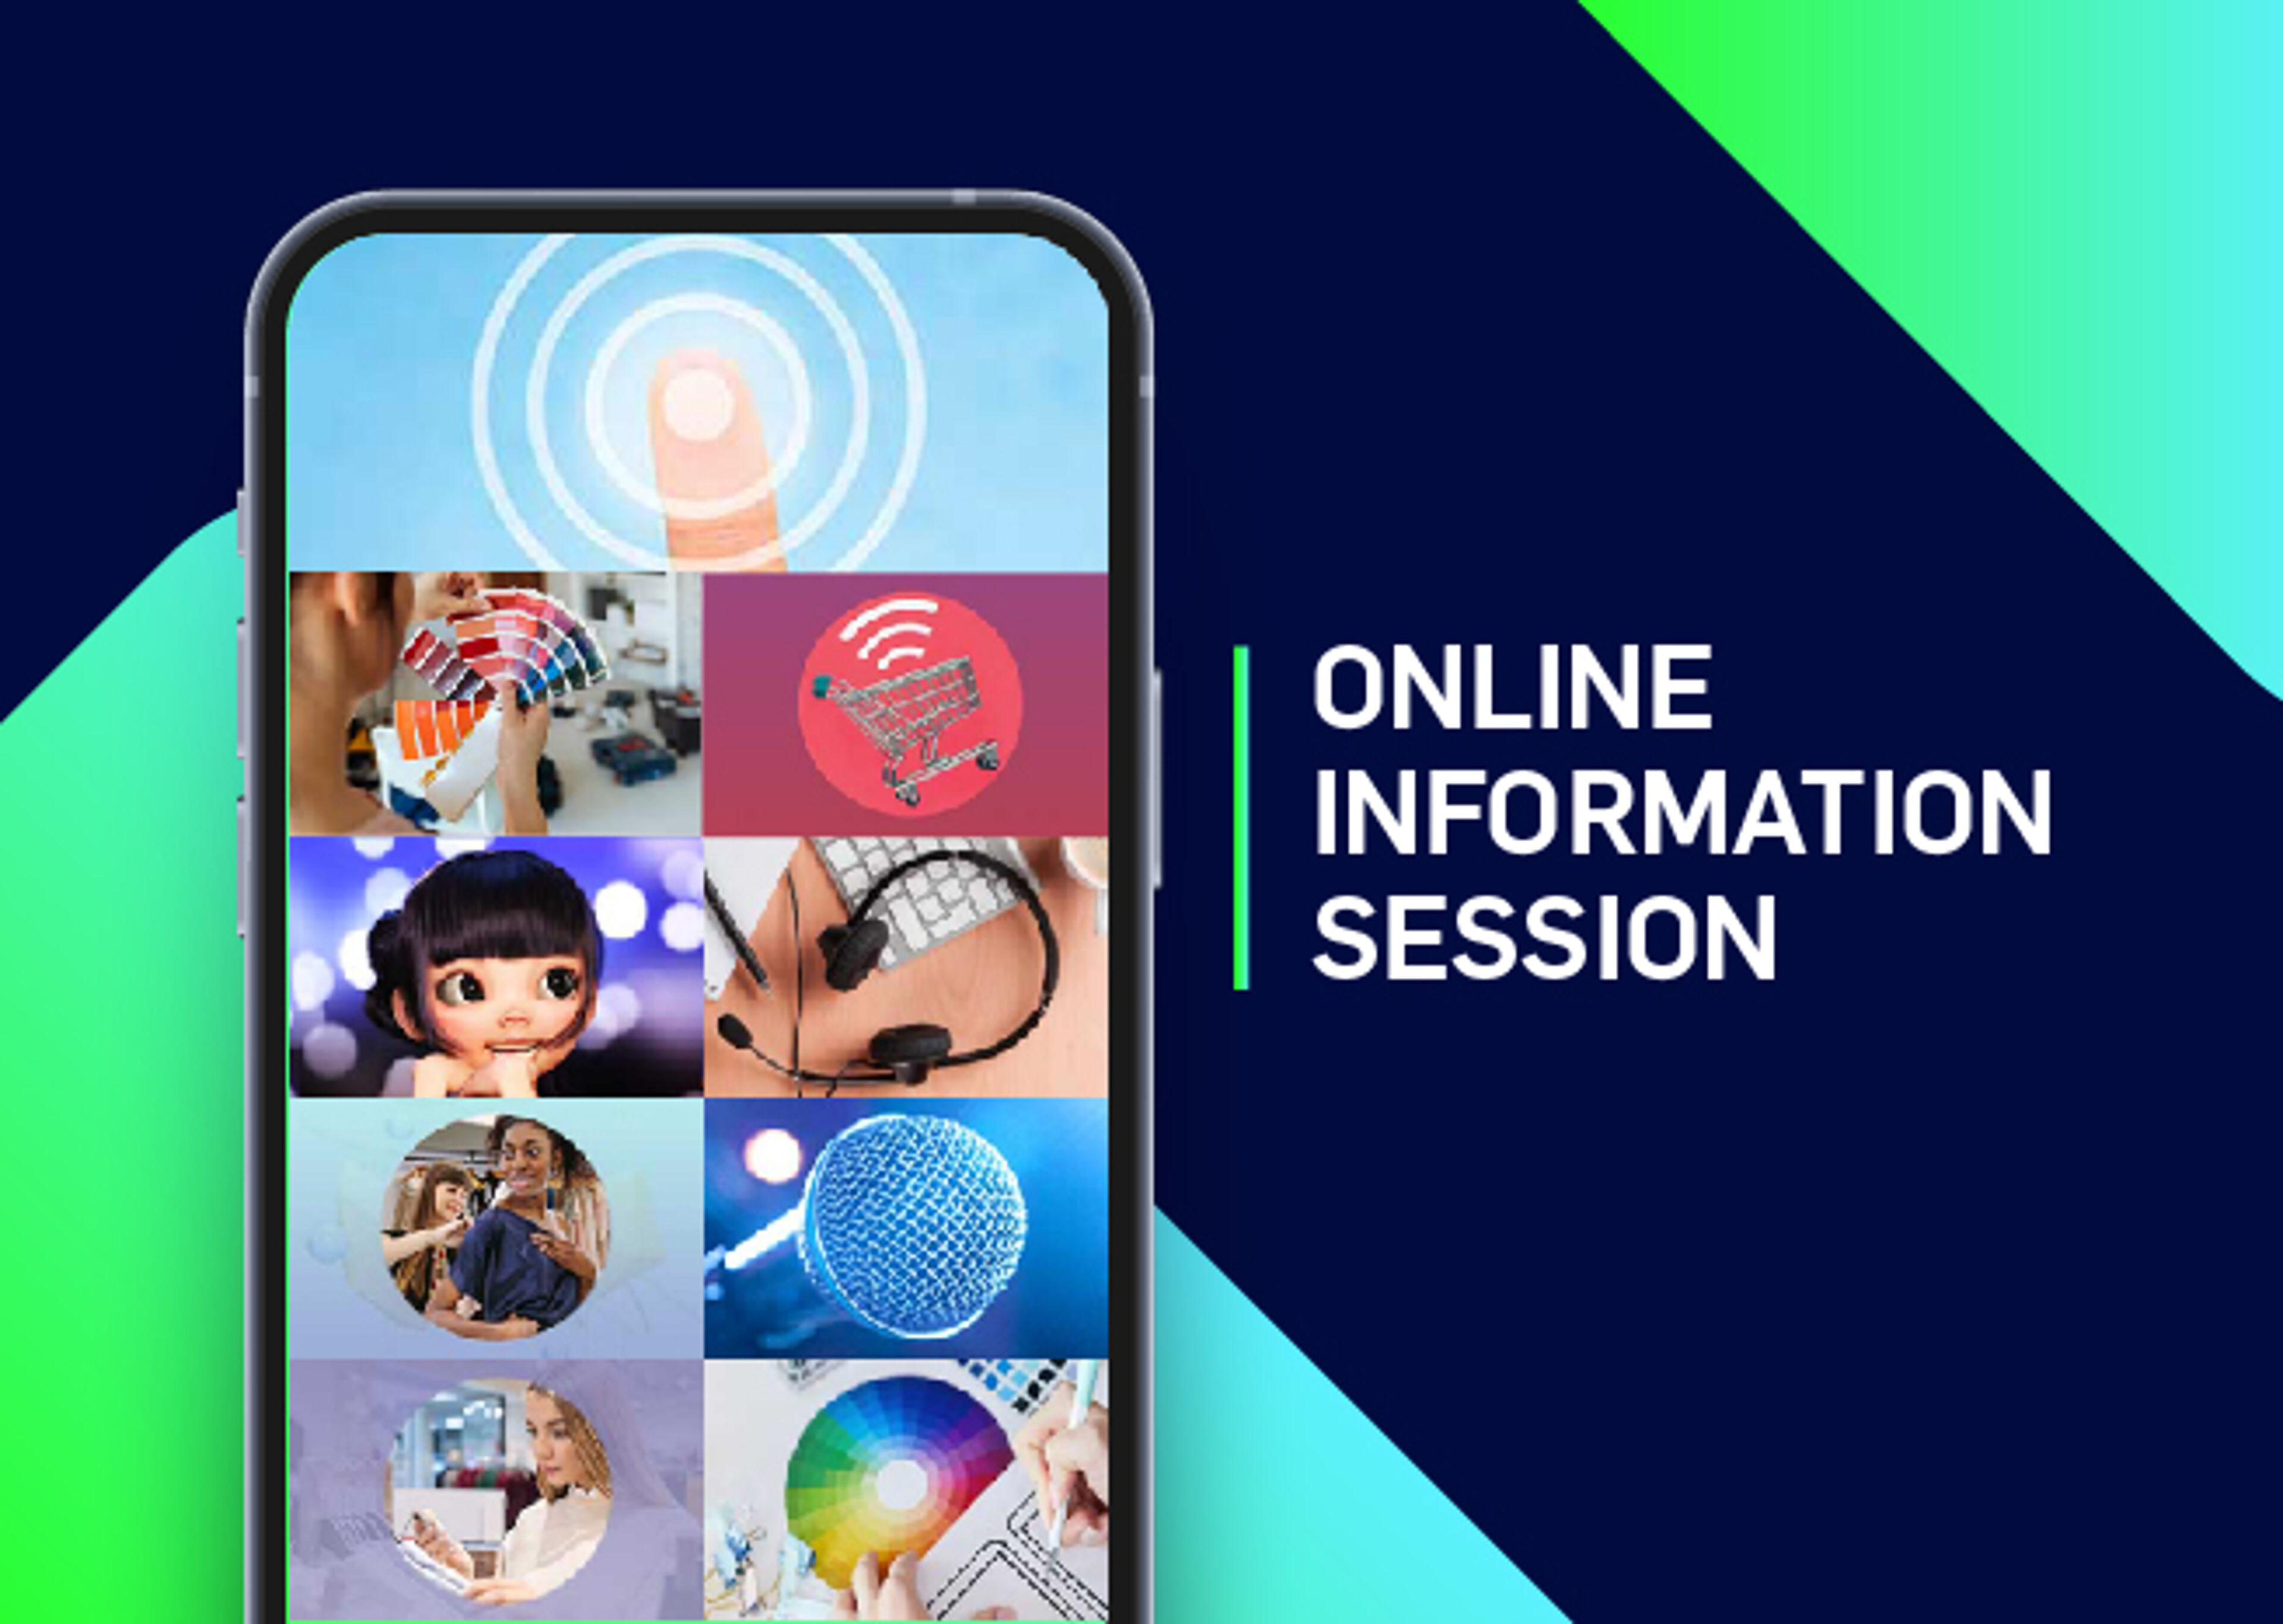 Graphic for an online information session, displaying a smartphone with various multimedia icons on the screen.